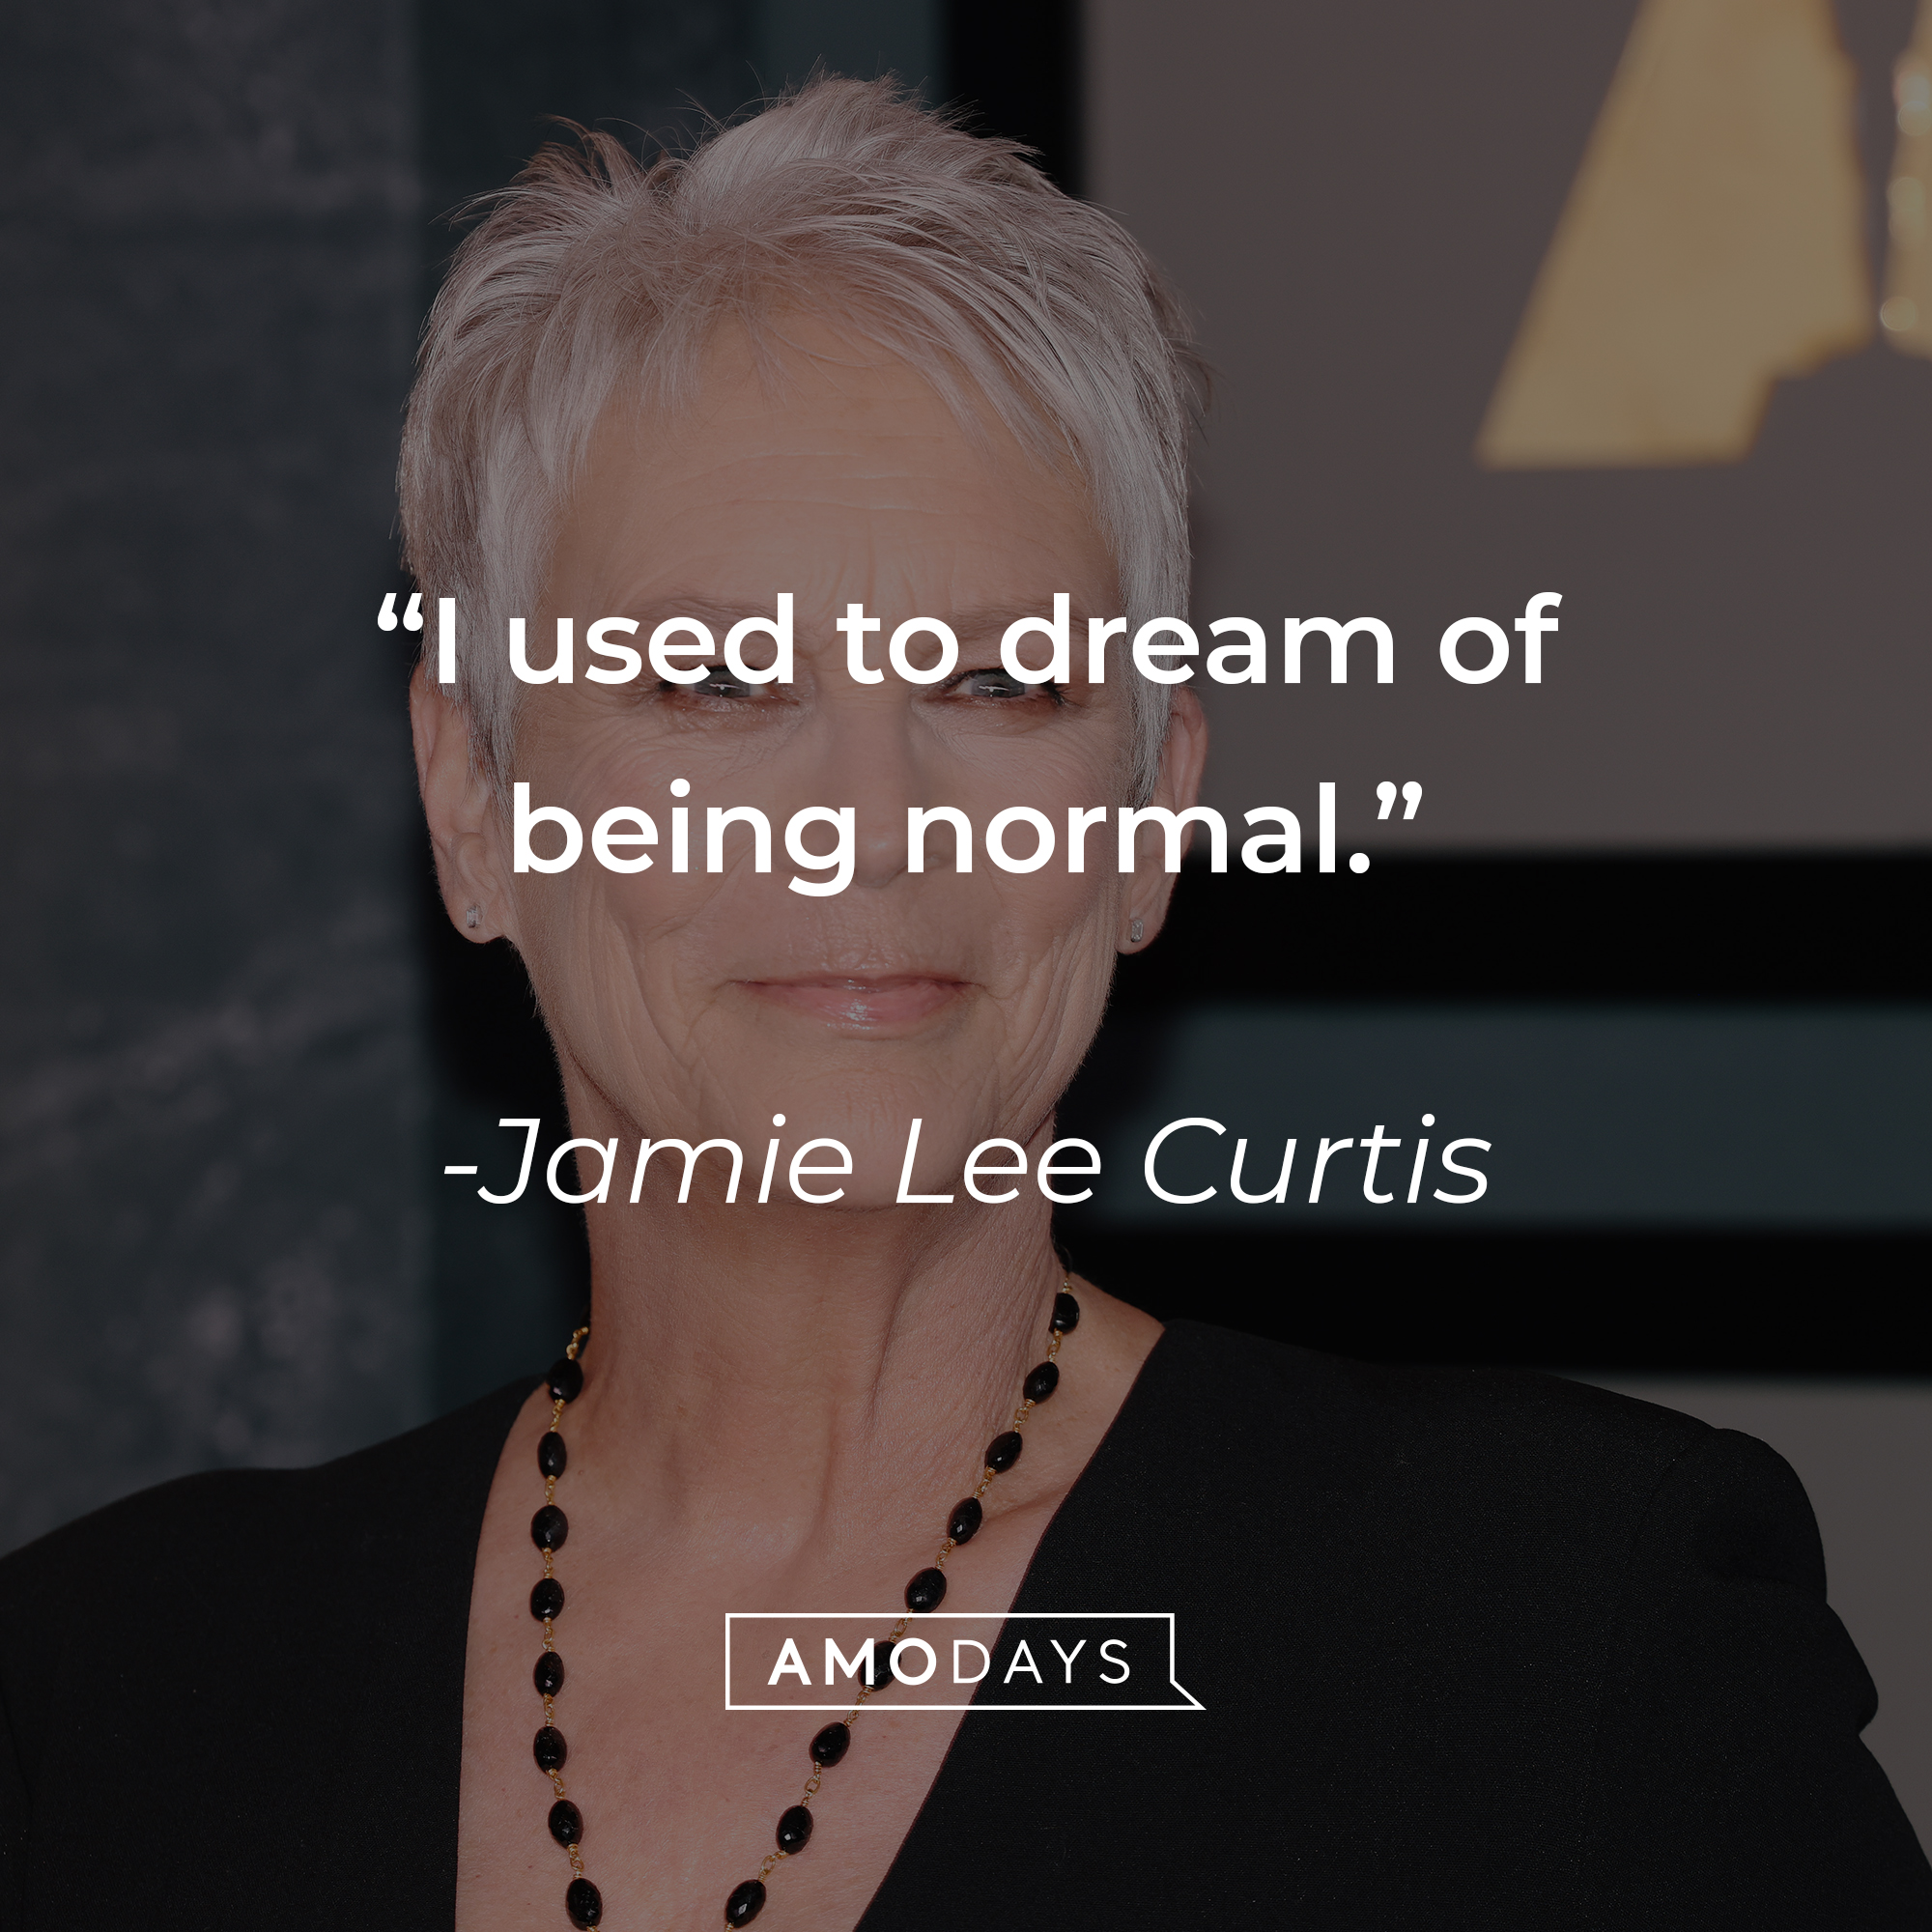 An image of Jamie Lee Curtis, with her quote: “I used to dream of being normal.” | Source: Getty Images